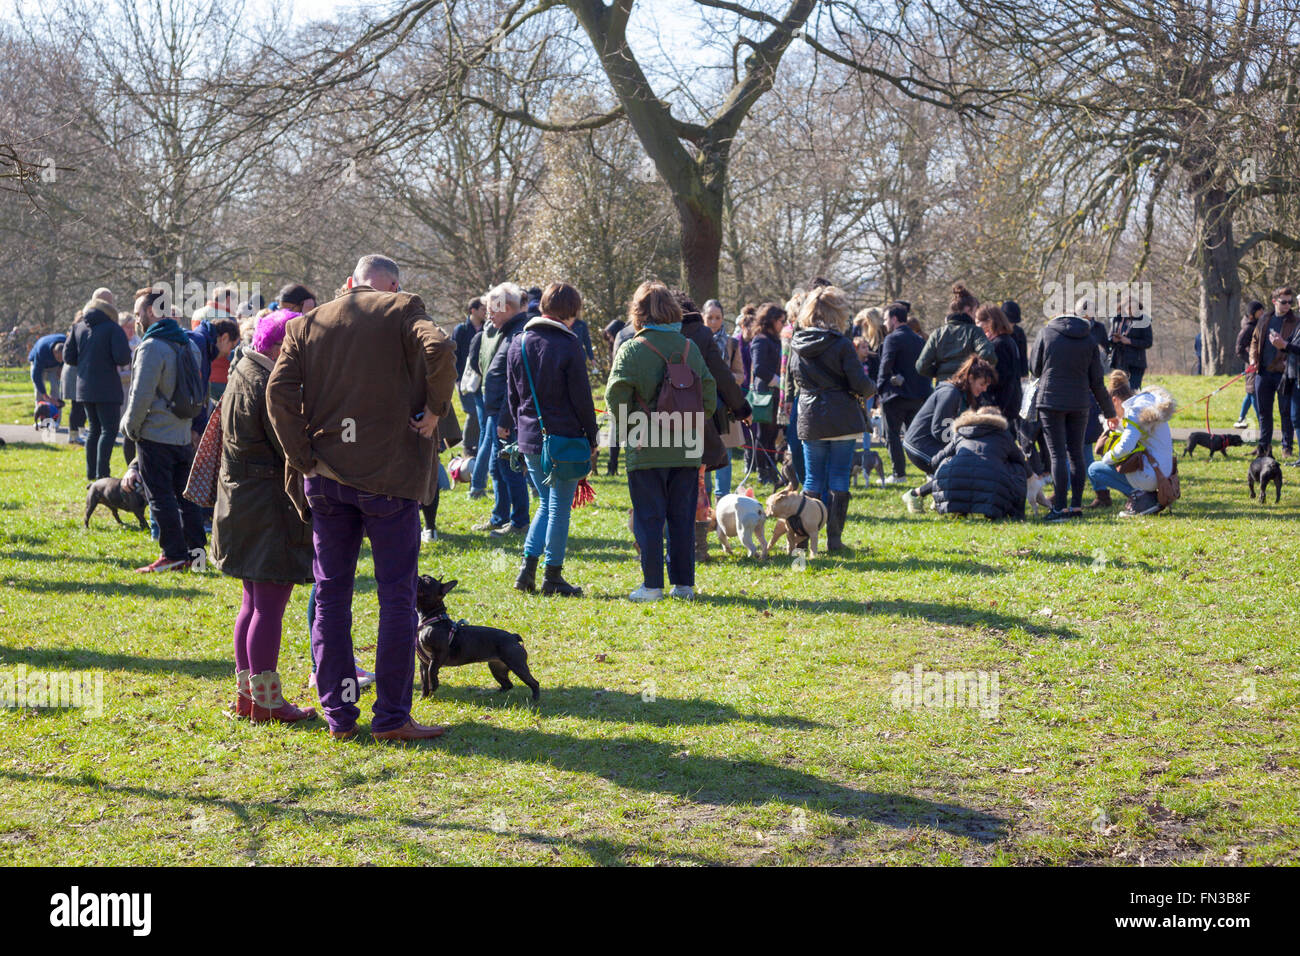 13th March 2016 - Meet-up and Walk of London French Bulldog owners in Regent's Park, London, UK Stock Photo